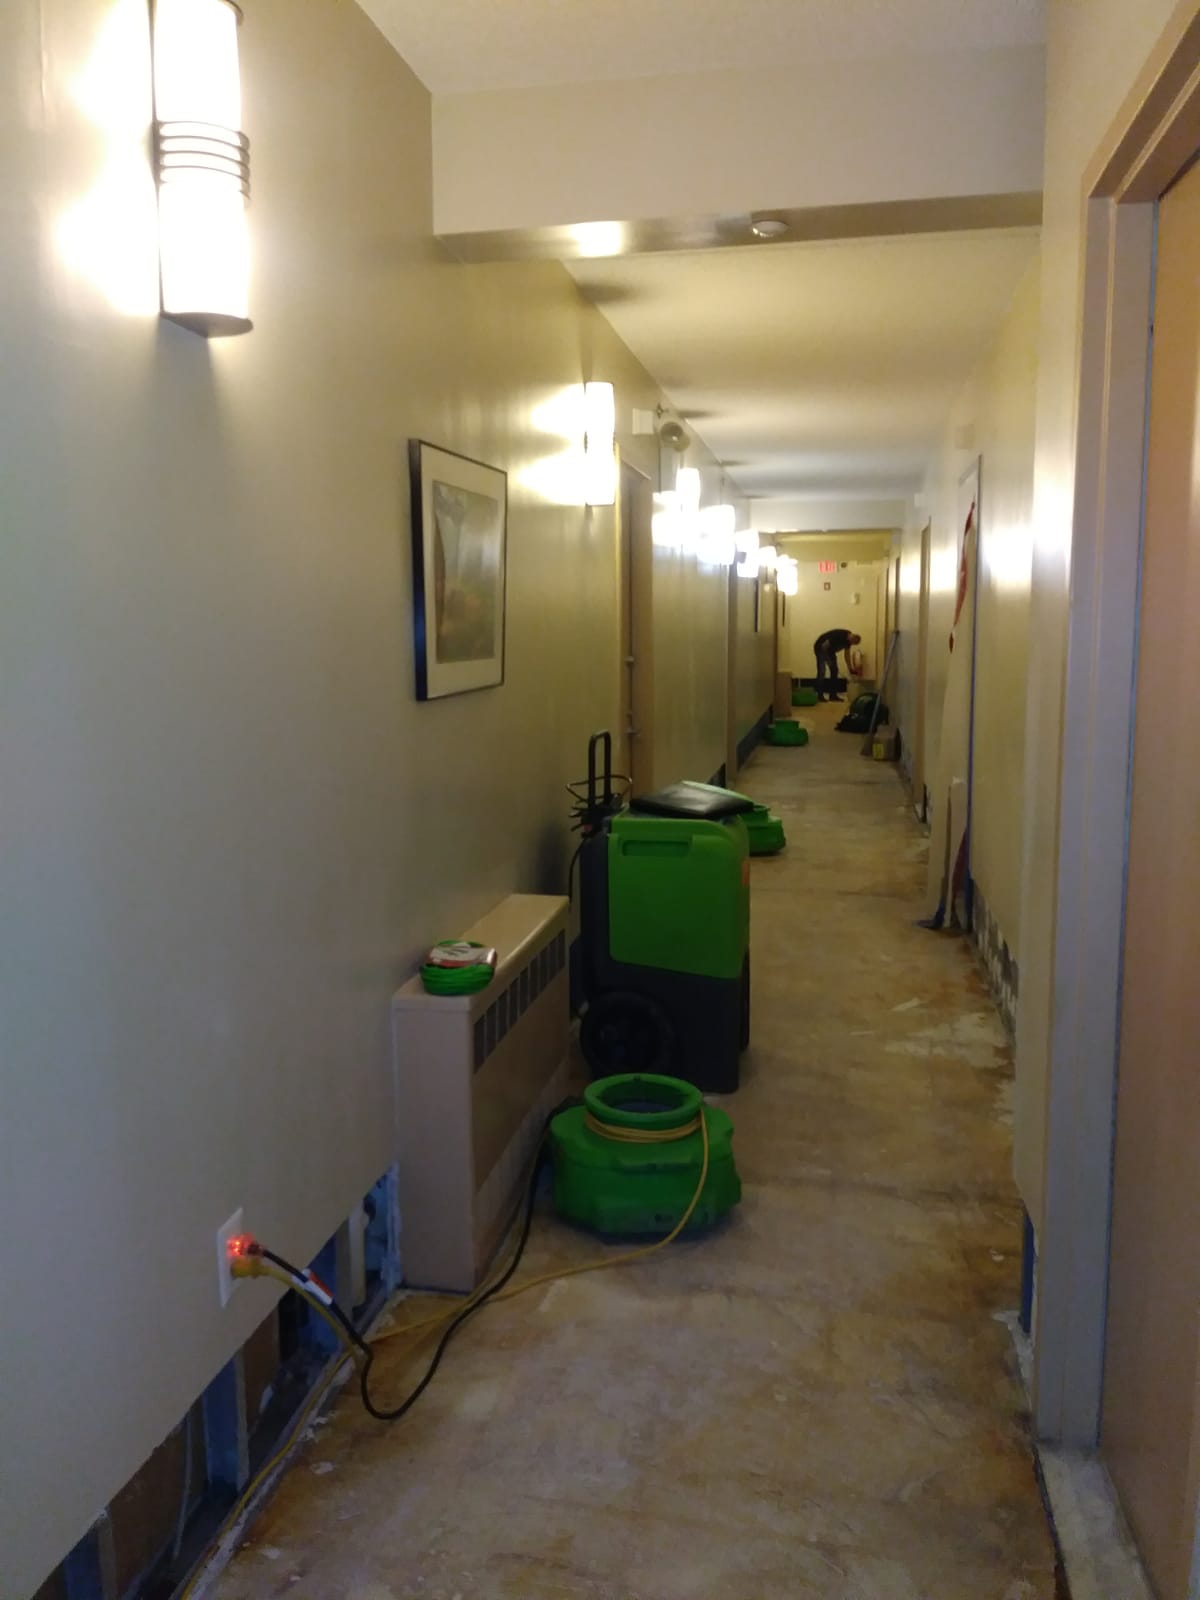 A fire on your commercial property can not only cause fire, soot, and smoke damage, it can also cause water damage as well. Give our /SERVPRO of Ozone Park/Jamaica Bay team a call for your fire and water damage restoration needs.